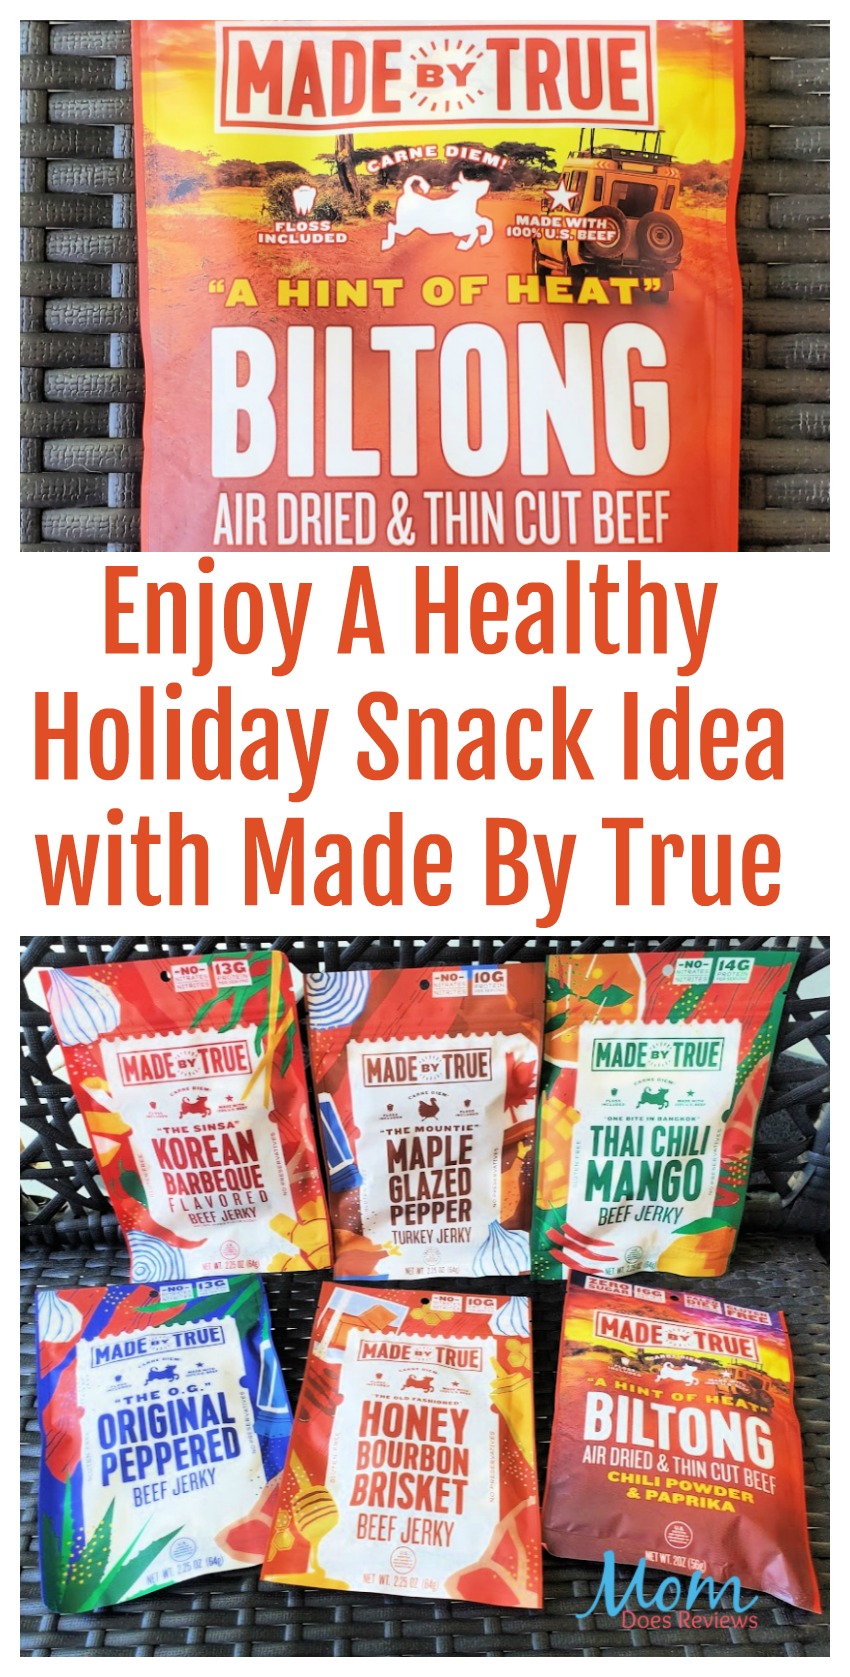 Enjoy A Healthy Holiday Snack Idea with Made By True